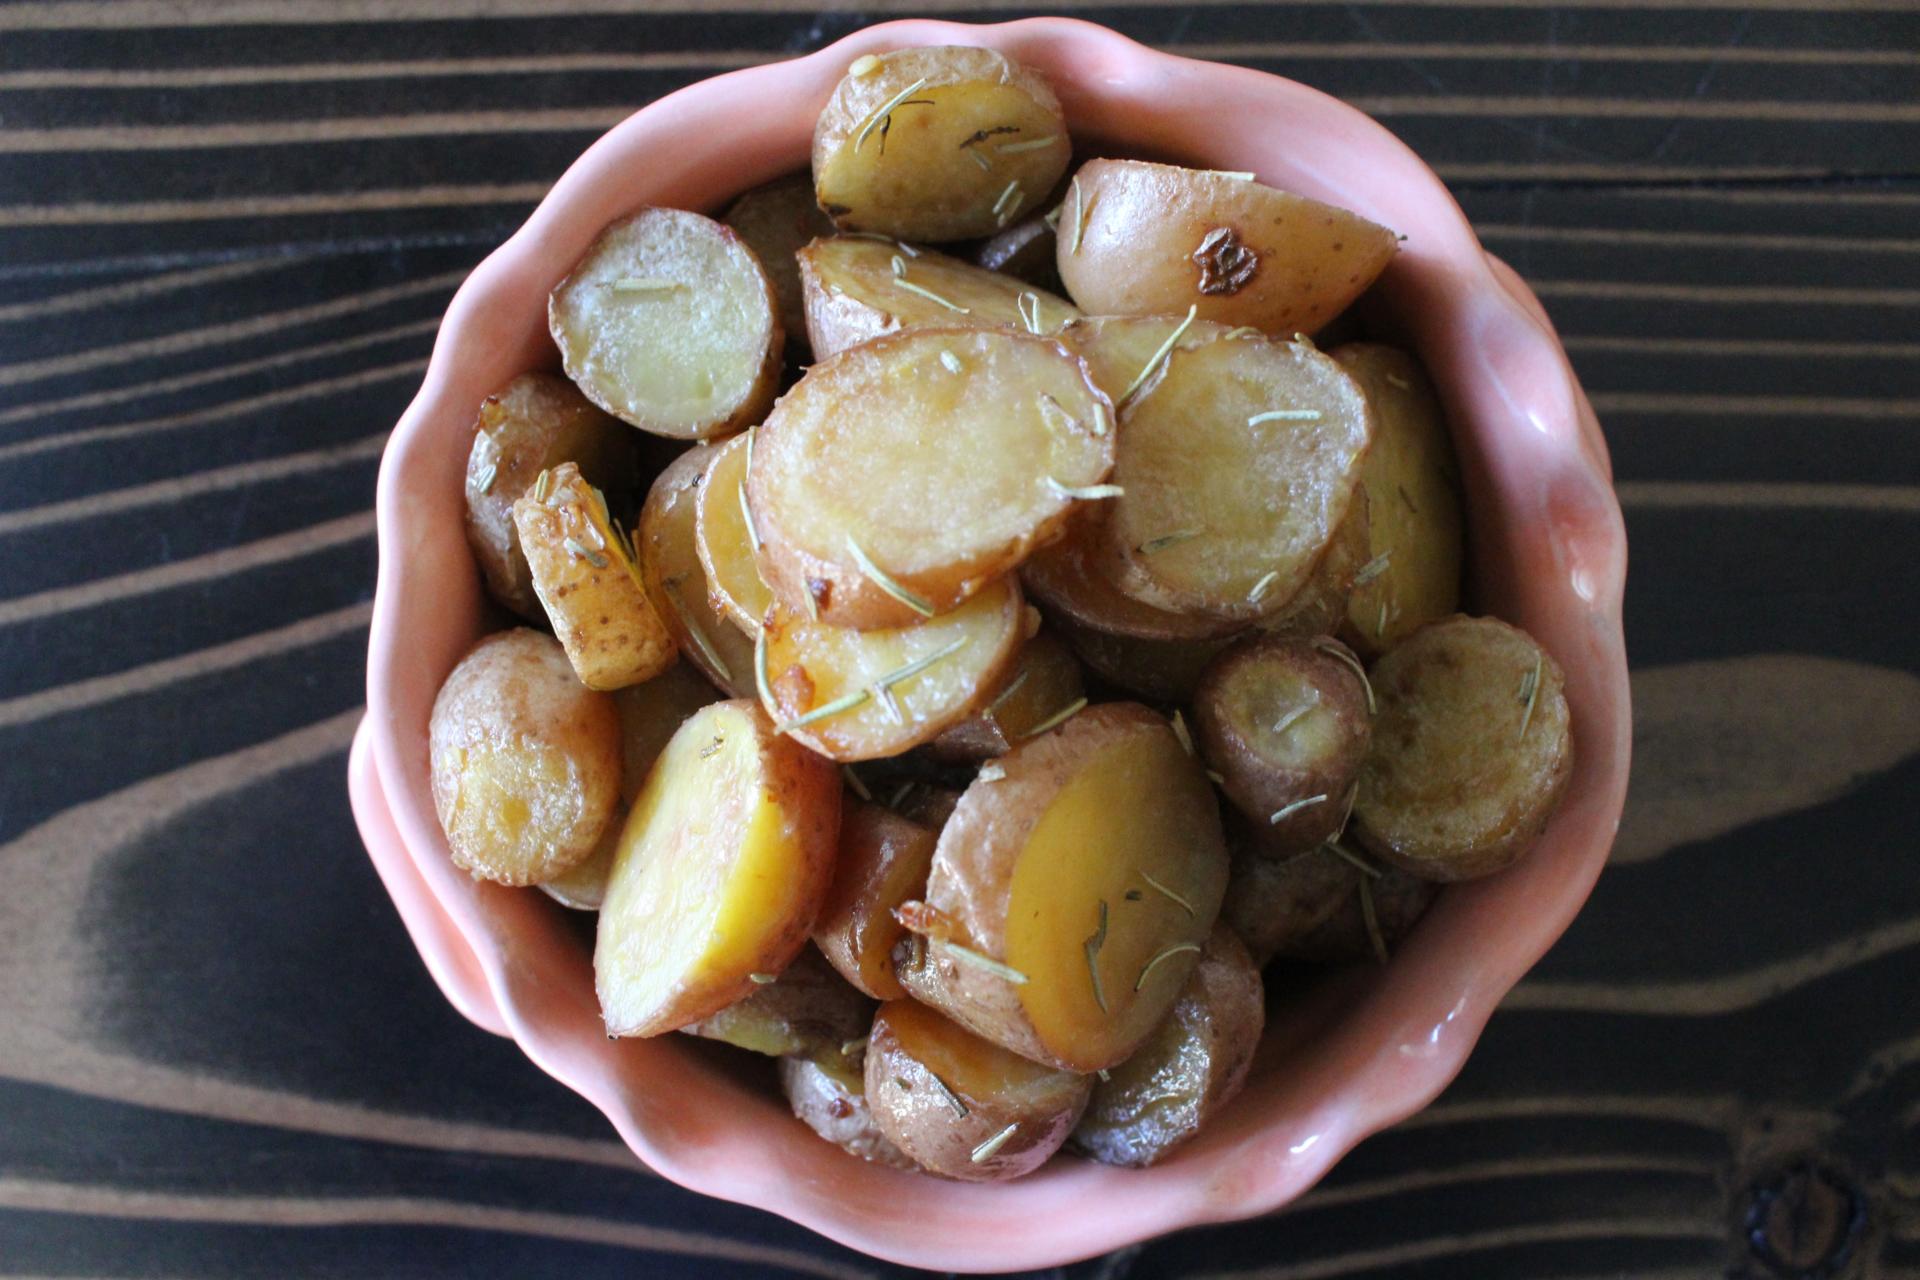 VEGGIES: Roasted Rosemary Potatoes by New Jersey foodie blogger What's For Dinner Esq.